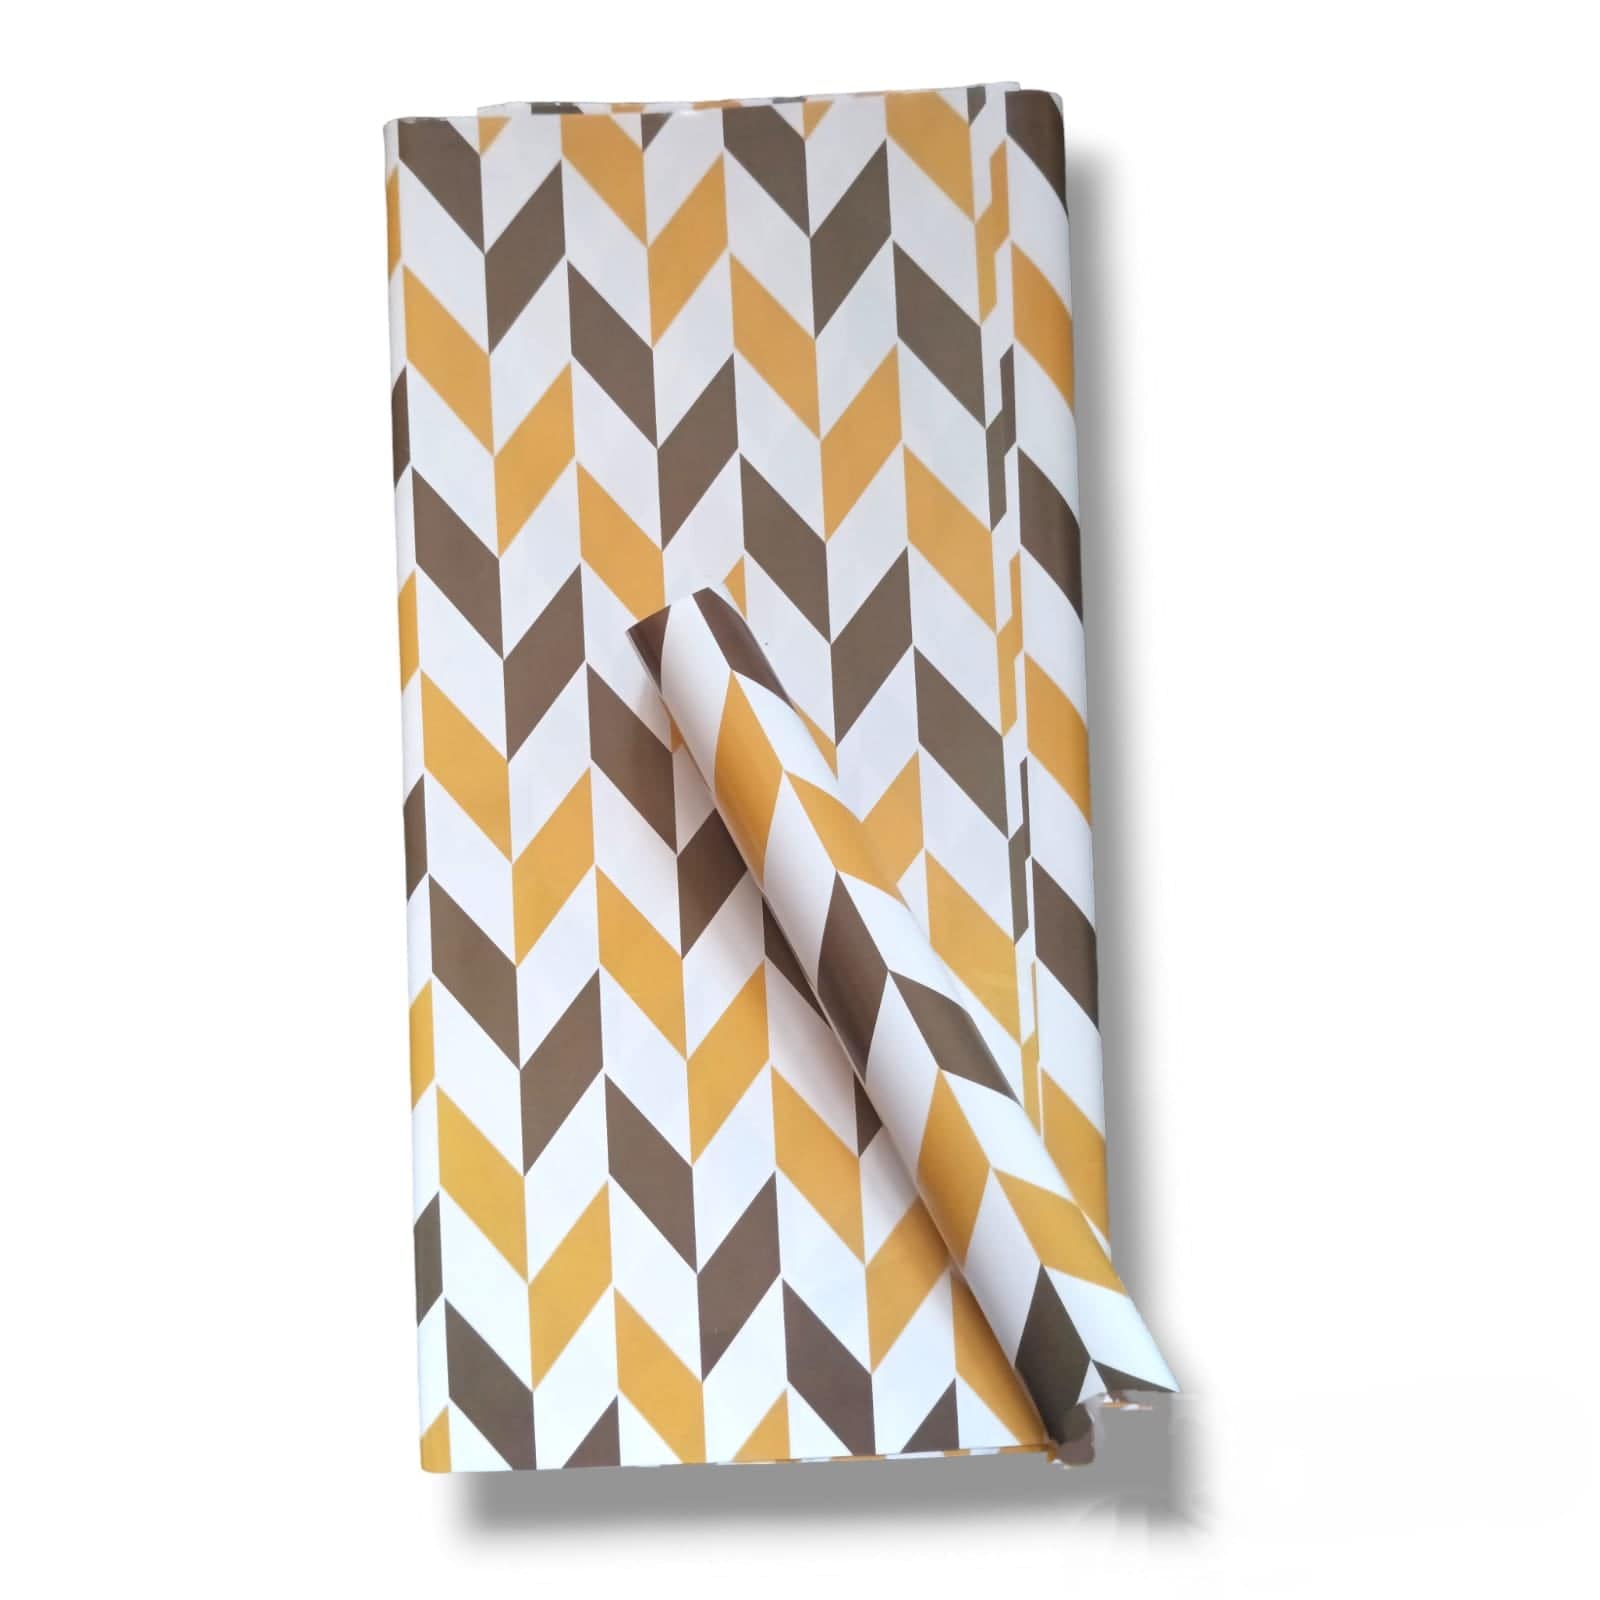 Honesty papers Wrapping Paper Gift Wrapping paper (Birthday Gifts) I Pack of 1 Sheet